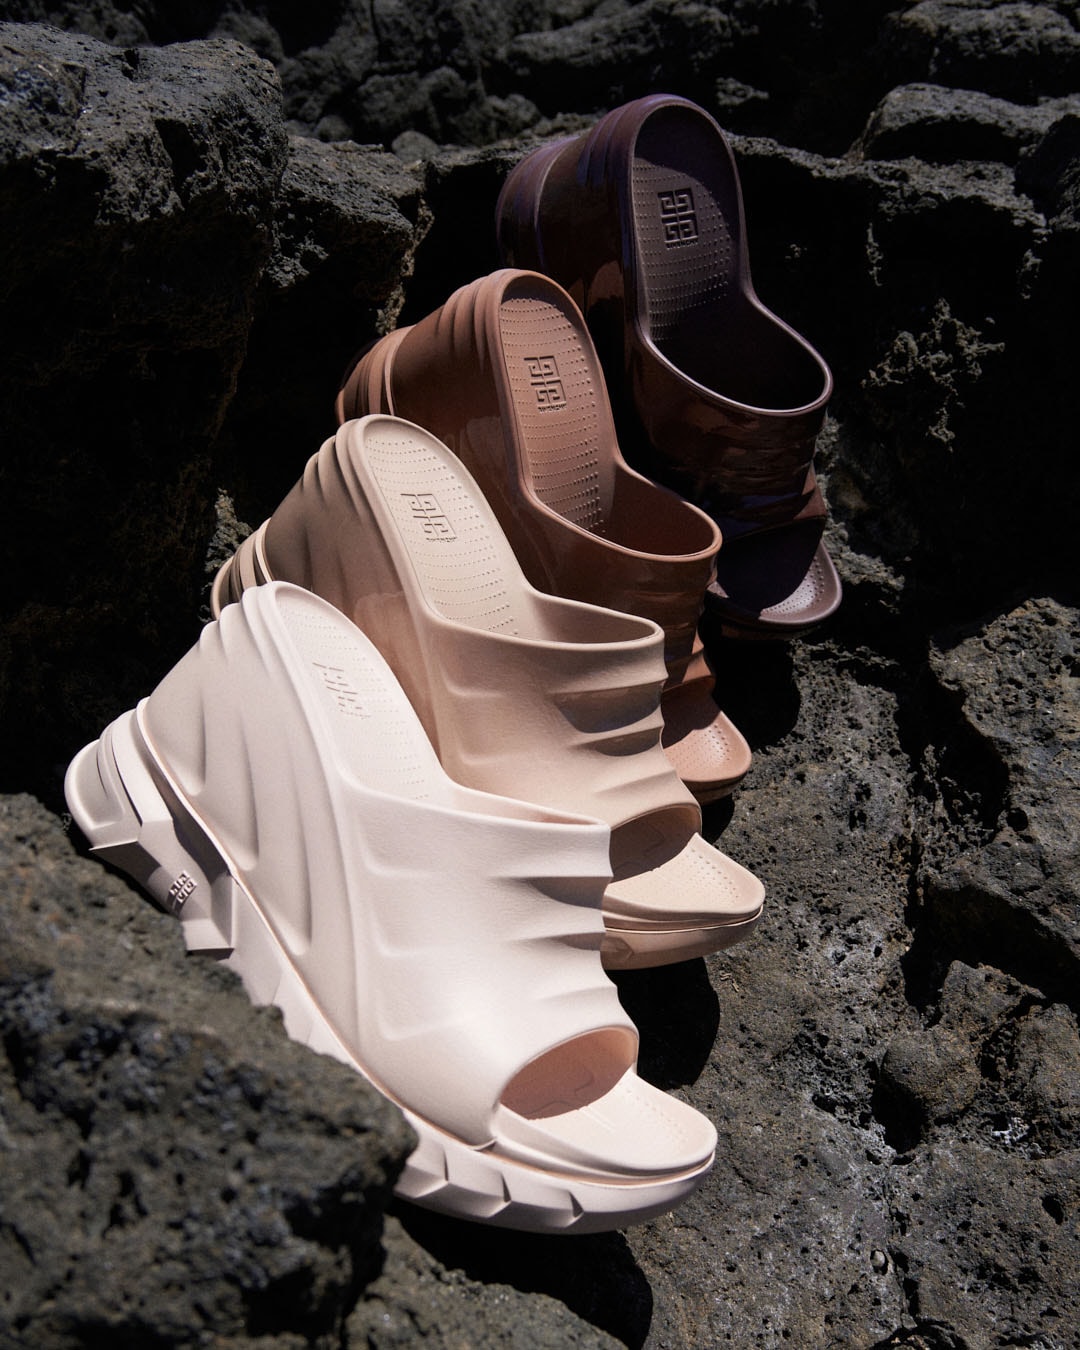 Marshmallow wedge sandals in rubber